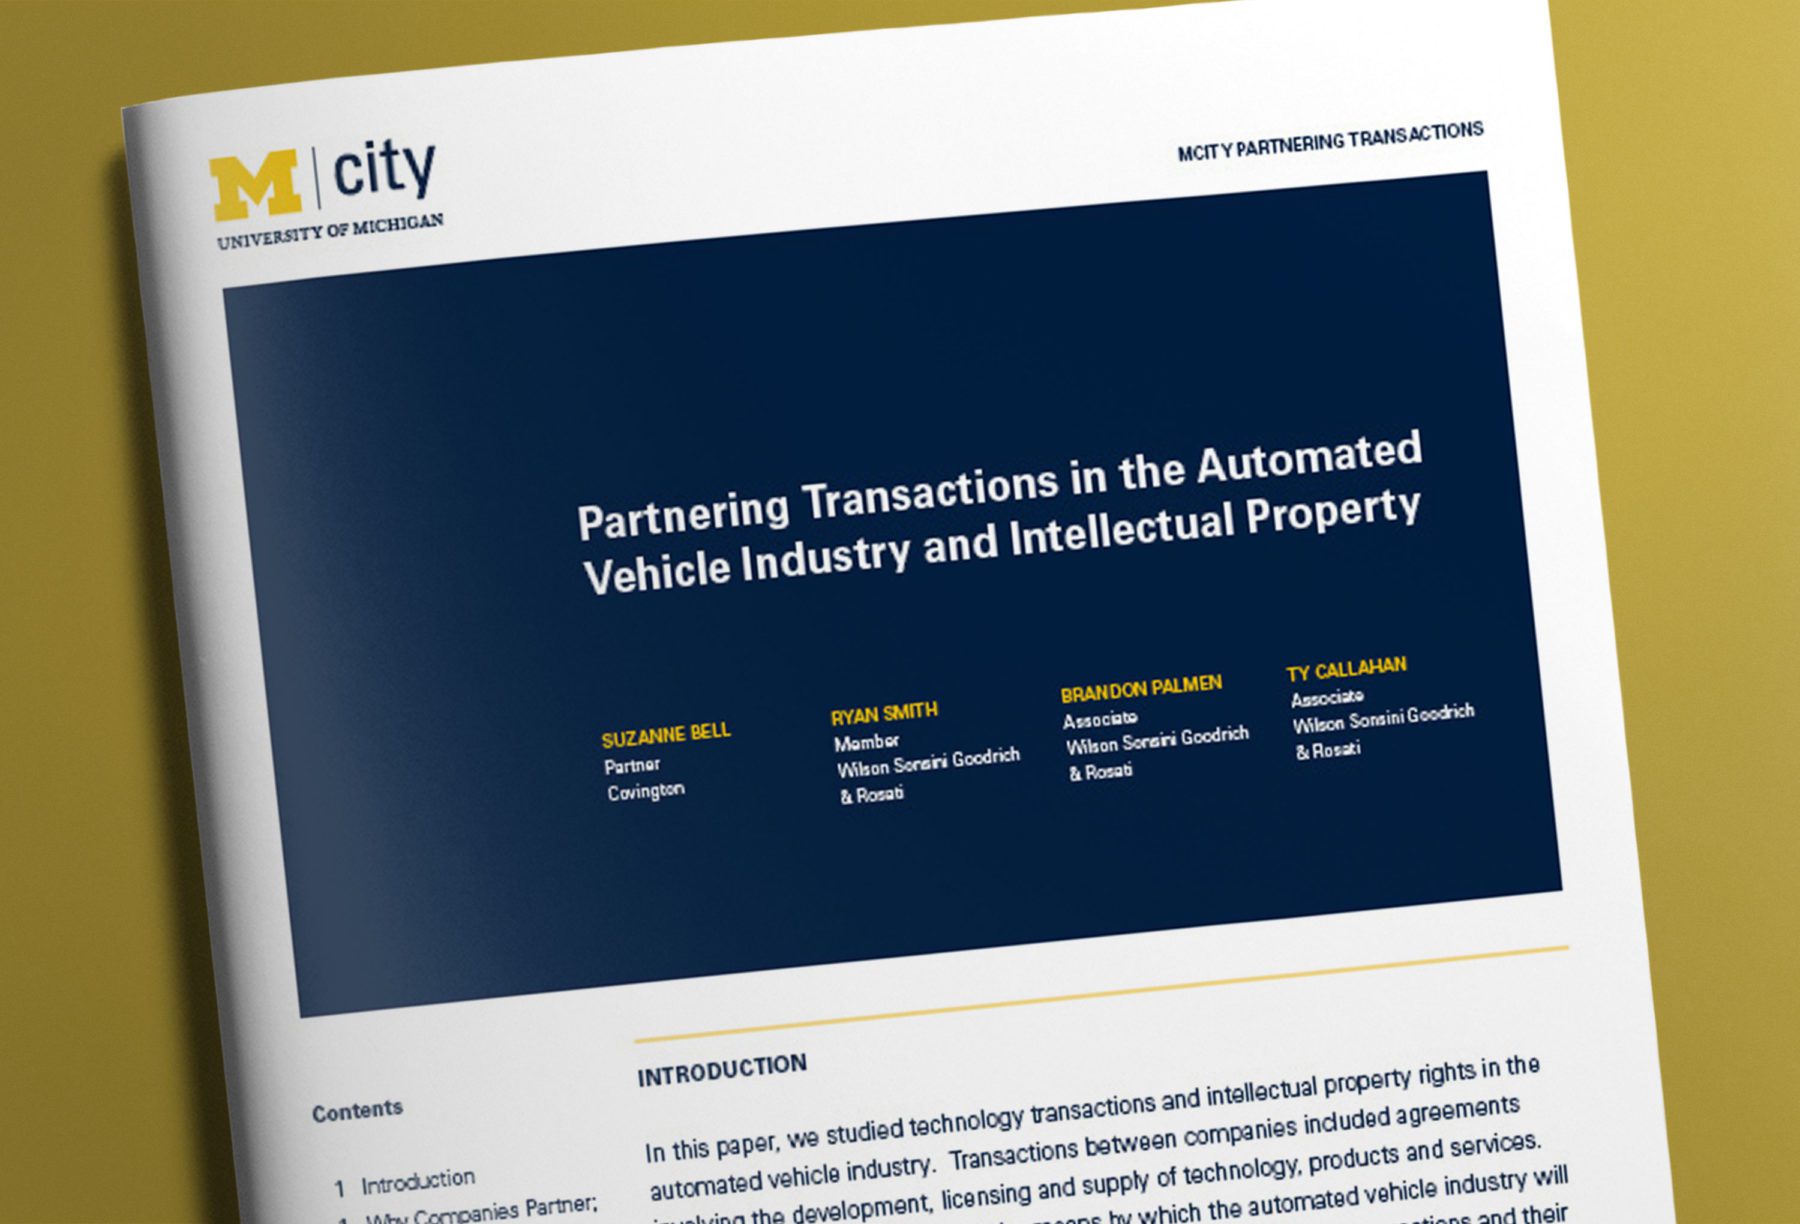 Partnering Transactions in the Automated Vehicle Industry and Intellectual Property